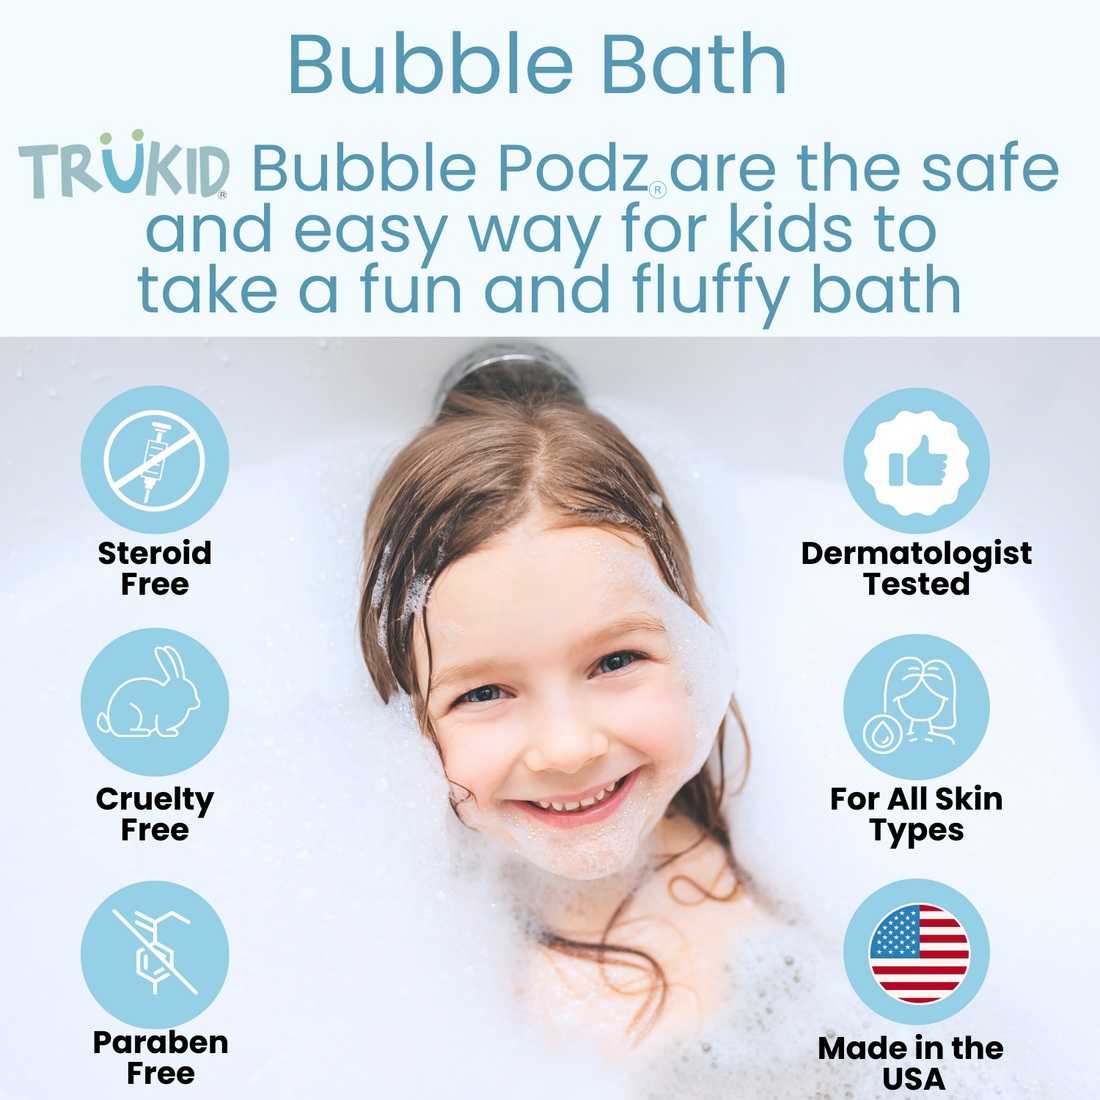 TruKid Bubble Podz are the safe and easy way for kids to take a fun and fluffy bath.